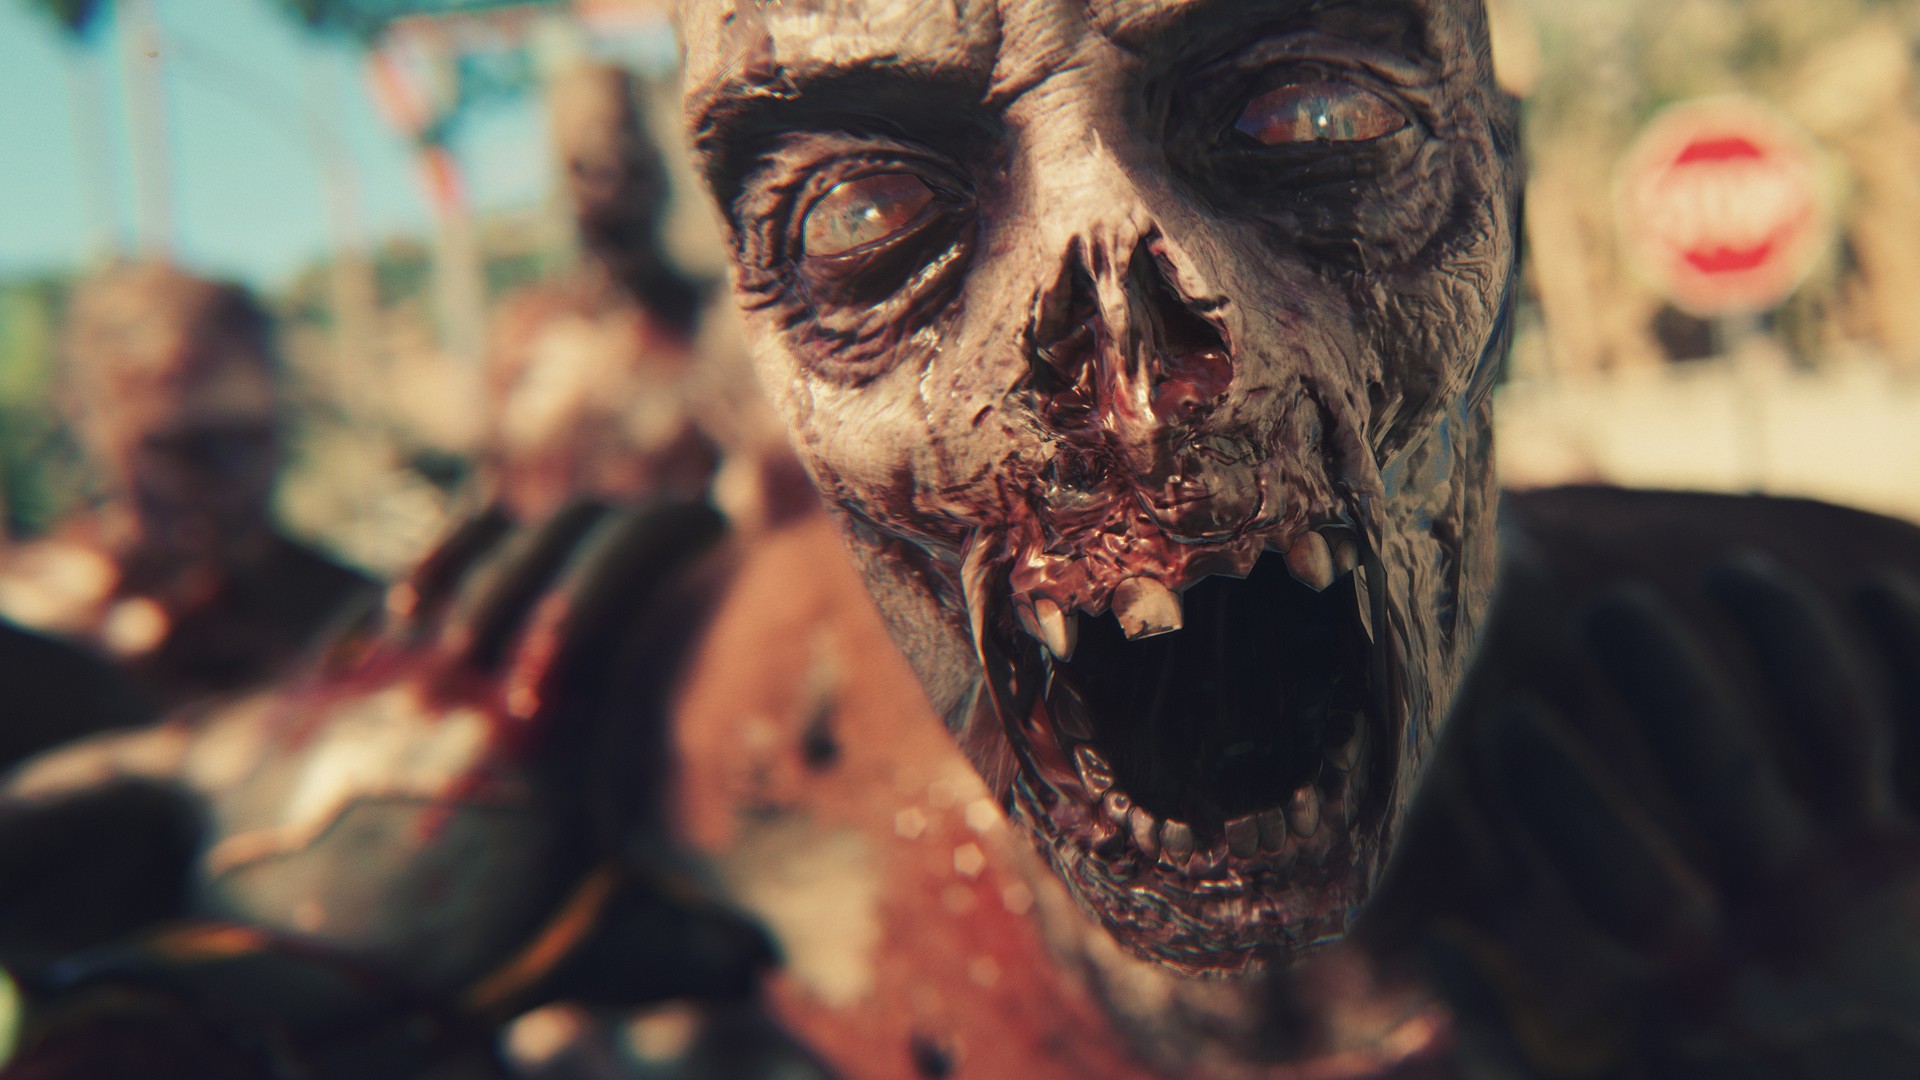 dead island 2 gameplay file